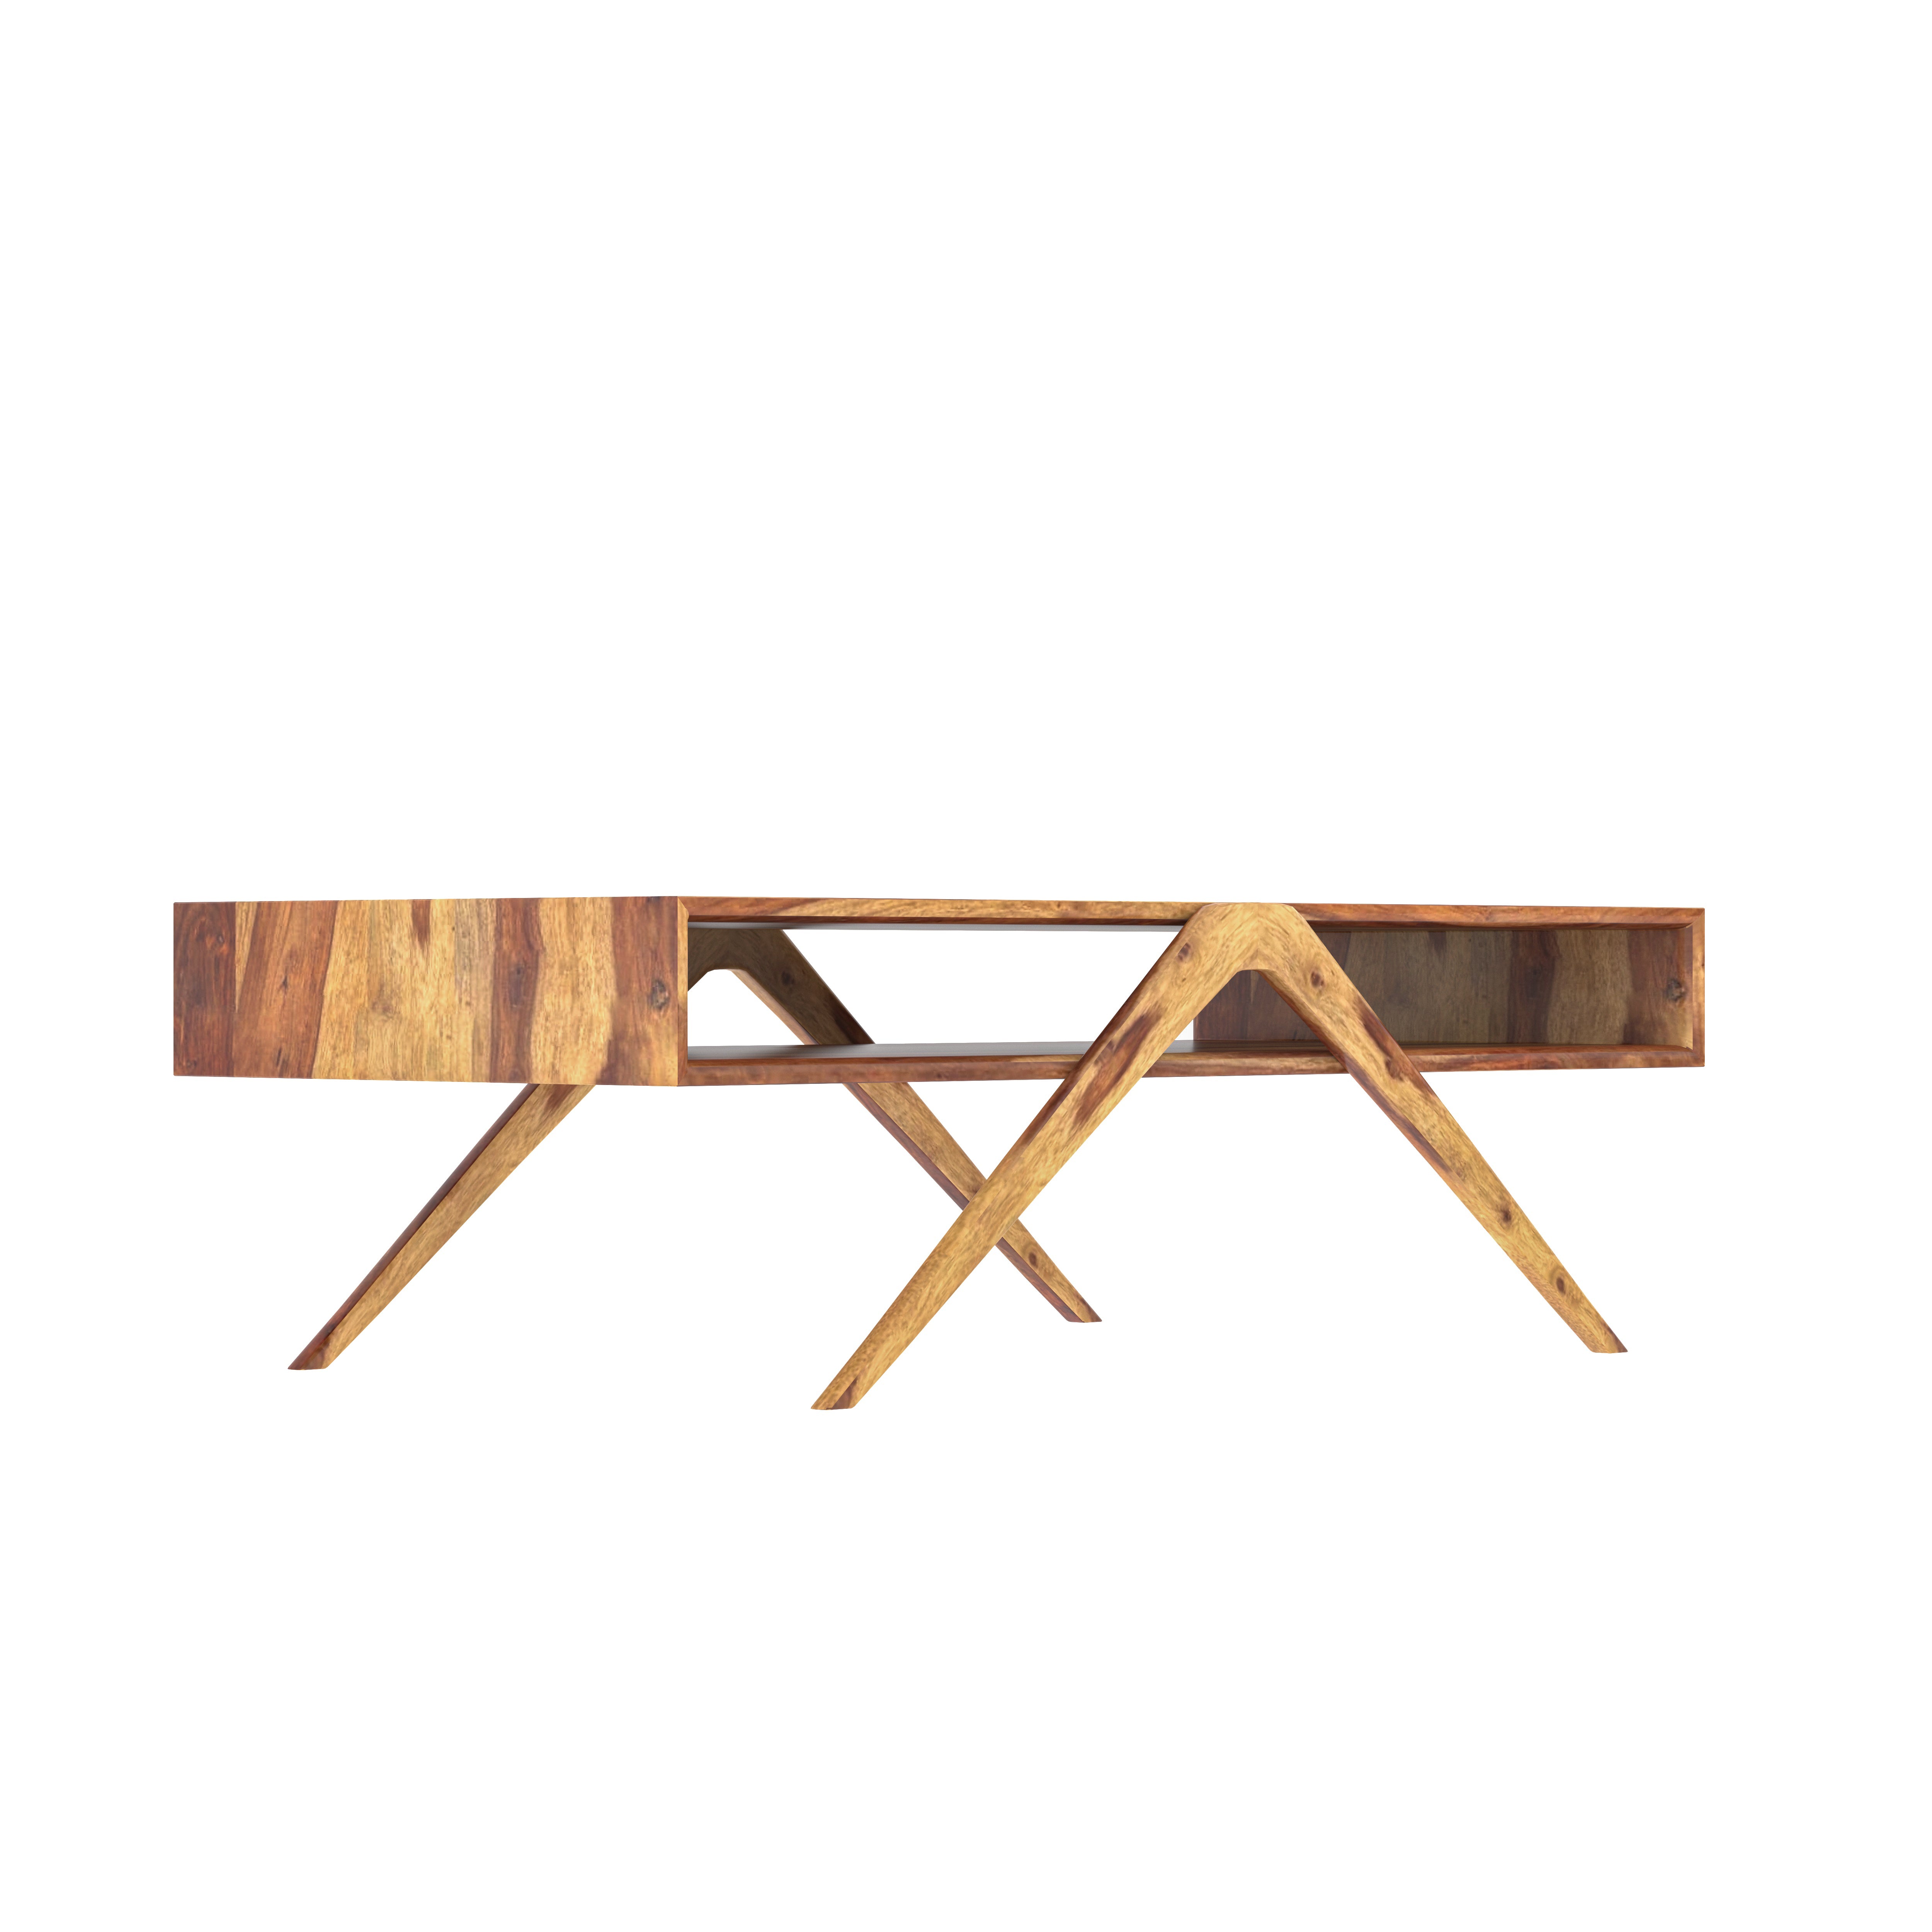 Denver Flora Finished Cross Legs Wooden Handmade Coffee Table Coffee Table